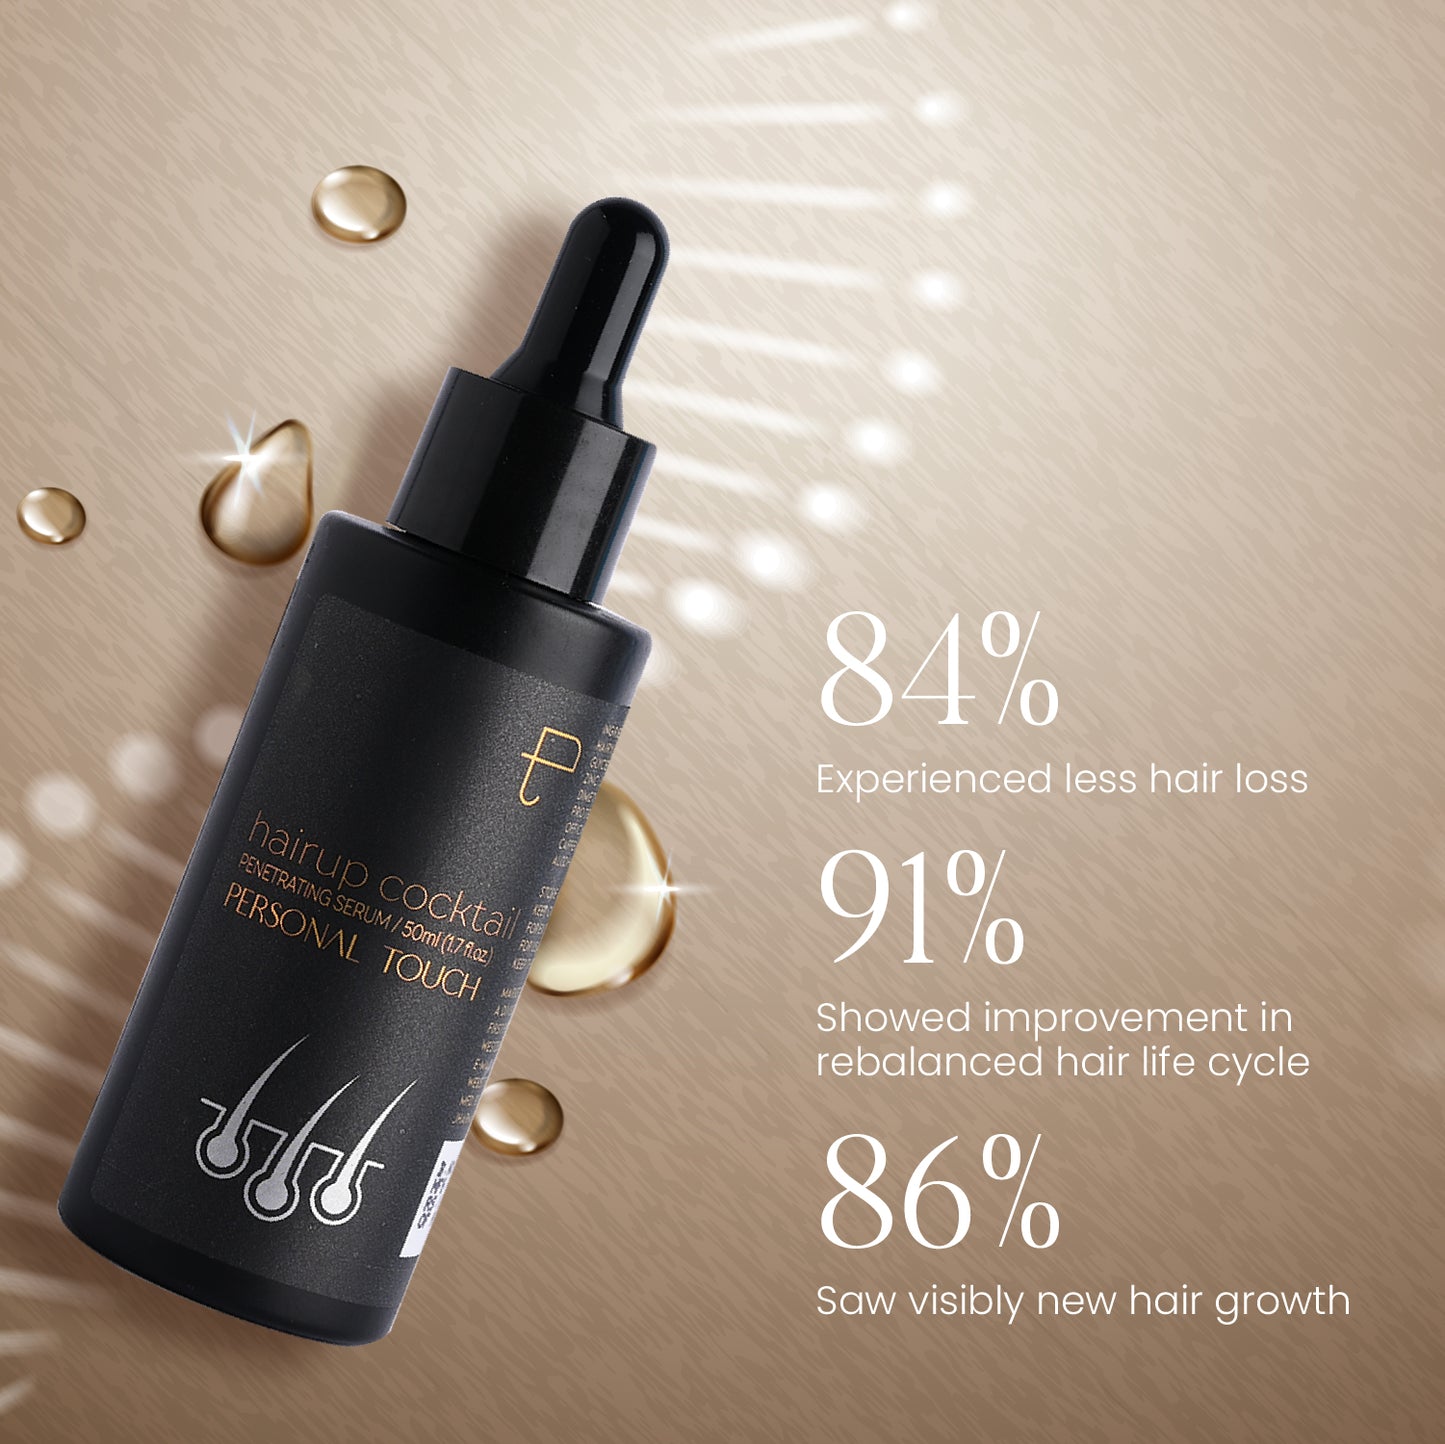 Hair Up Cocktail - 3 Month Pack - Advanced Hair Growth Serum with Anagain & Redensyl